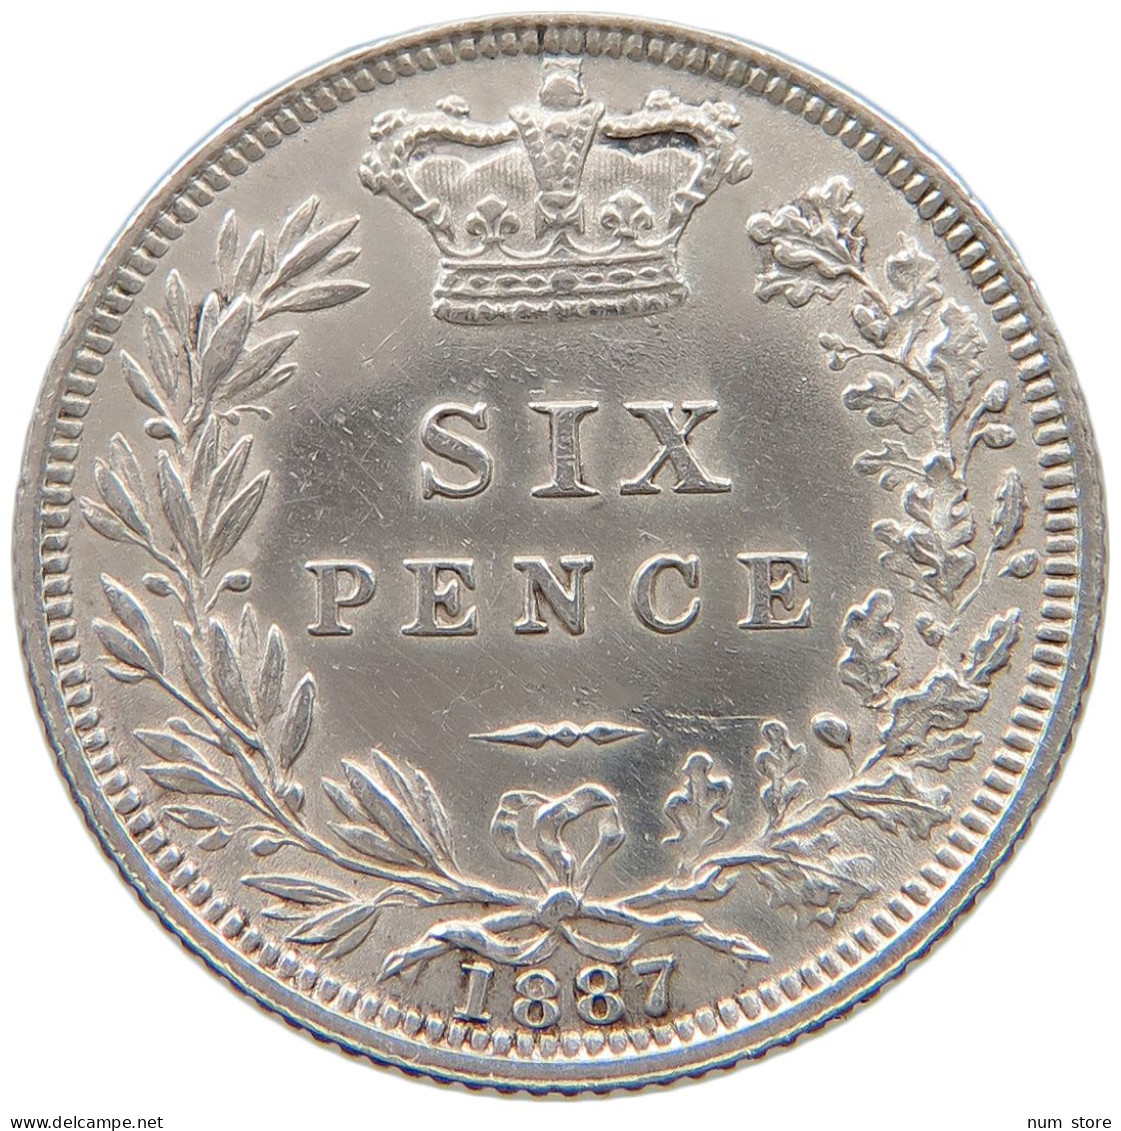 GREAT BRITAIN SIXPENCE 1887 Victoria 1837-1901 #t107 0457 - H. 6 Pence